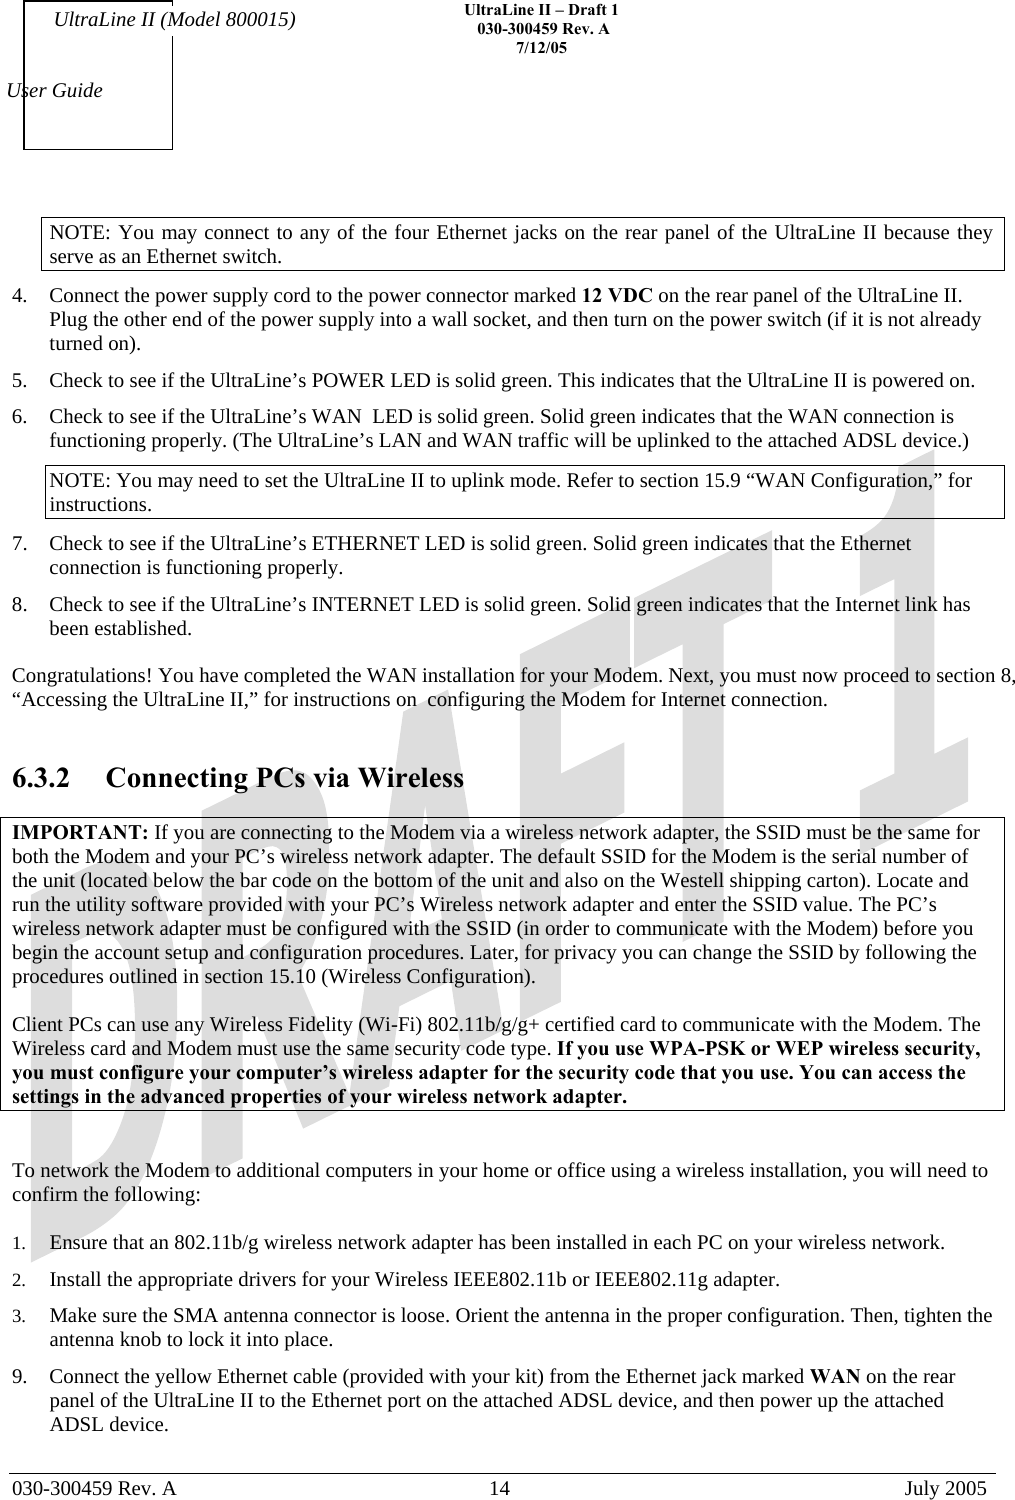    UltraLine II – Draft 1   030-300459 Rev. A 7/12/05   030-300459 Rev. A  14  July 2005  User Guide UltraLine II (Model 800015) NOTE: You may connect to any of the four Ethernet jacks on the rear panel of the UltraLine II because they serve as an Ethernet switch. 4.  Connect the power supply cord to the power connector marked 12 VDC on the rear panel of the UltraLine II. Plug the other end of the power supply into a wall socket, and then turn on the power switch (if it is not already turned on). 5.  Check to see if the UltraLine’s POWER LED is solid green. This indicates that the UltraLine II is powered on. 6.  Check to see if the UltraLine’s WAN  LED is solid green. Solid green indicates that the WAN connection is functioning properly. (The UltraLine’s LAN and WAN traffic will be uplinked to the attached ADSL device.) NOTE: You may need to set the UltraLine II to uplink mode. Refer to section 15.9 “WAN Configuration,” for instructions. 7.  Check to see if the UltraLine’s ETHERNET LED is solid green. Solid green indicates that the Ethernet connection is functioning properly. 8.  Check to see if the UltraLine’s INTERNET LED is solid green. Solid green indicates that the Internet link has been established.  Congratulations! You have completed the WAN installation for your Modem. Next, you must now proceed to section 8, “Accessing the UltraLine II,” for instructions on  configuring the Modem for Internet connection.    6.3.2  Connecting PCs via Wireless  IMPORTANT: If you are connecting to the Modem via a wireless network adapter, the SSID must be the same for both the Modem and your PC’s wireless network adapter. The default SSID for the Modem is the serial number of the unit (located below the bar code on the bottom of the unit and also on the Westell shipping carton). Locate and run the utility software provided with your PC’s Wireless network adapter and enter the SSID value. The PC’s wireless network adapter must be configured with the SSID (in order to communicate with the Modem) before you begin the account setup and configuration procedures. Later, for privacy you can change the SSID by following the procedures outlined in section 15.10 (Wireless Configuration).  Client PCs can use any Wireless Fidelity (Wi-Fi) 802.11b/g/g+ certified card to communicate with the Modem. The Wireless card and Modem must use the same security code type. If you use WPA-PSK or WEP wireless security, you must configure your computer’s wireless adapter for the security code that you use. You can access the settings in the advanced properties of your wireless network adapter.   To network the Modem to additional computers in your home or office using a wireless installation, you will need to confirm the following:  1.  Ensure that an 802.11b/g wireless network adapter has been installed in each PC on your wireless network. 2.  Install the appropriate drivers for your Wireless IEEE802.11b or IEEE802.11g adapter. 3.  Make sure the SMA antenna connector is loose. Orient the antenna in the proper configuration. Then, tighten the antenna knob to lock it into place. 9.  Connect the yellow Ethernet cable (provided with your kit) from the Ethernet jack marked WAN on the rear panel of the UltraLine II to the Ethernet port on the attached ADSL device, and then power up the attached ADSL device. 